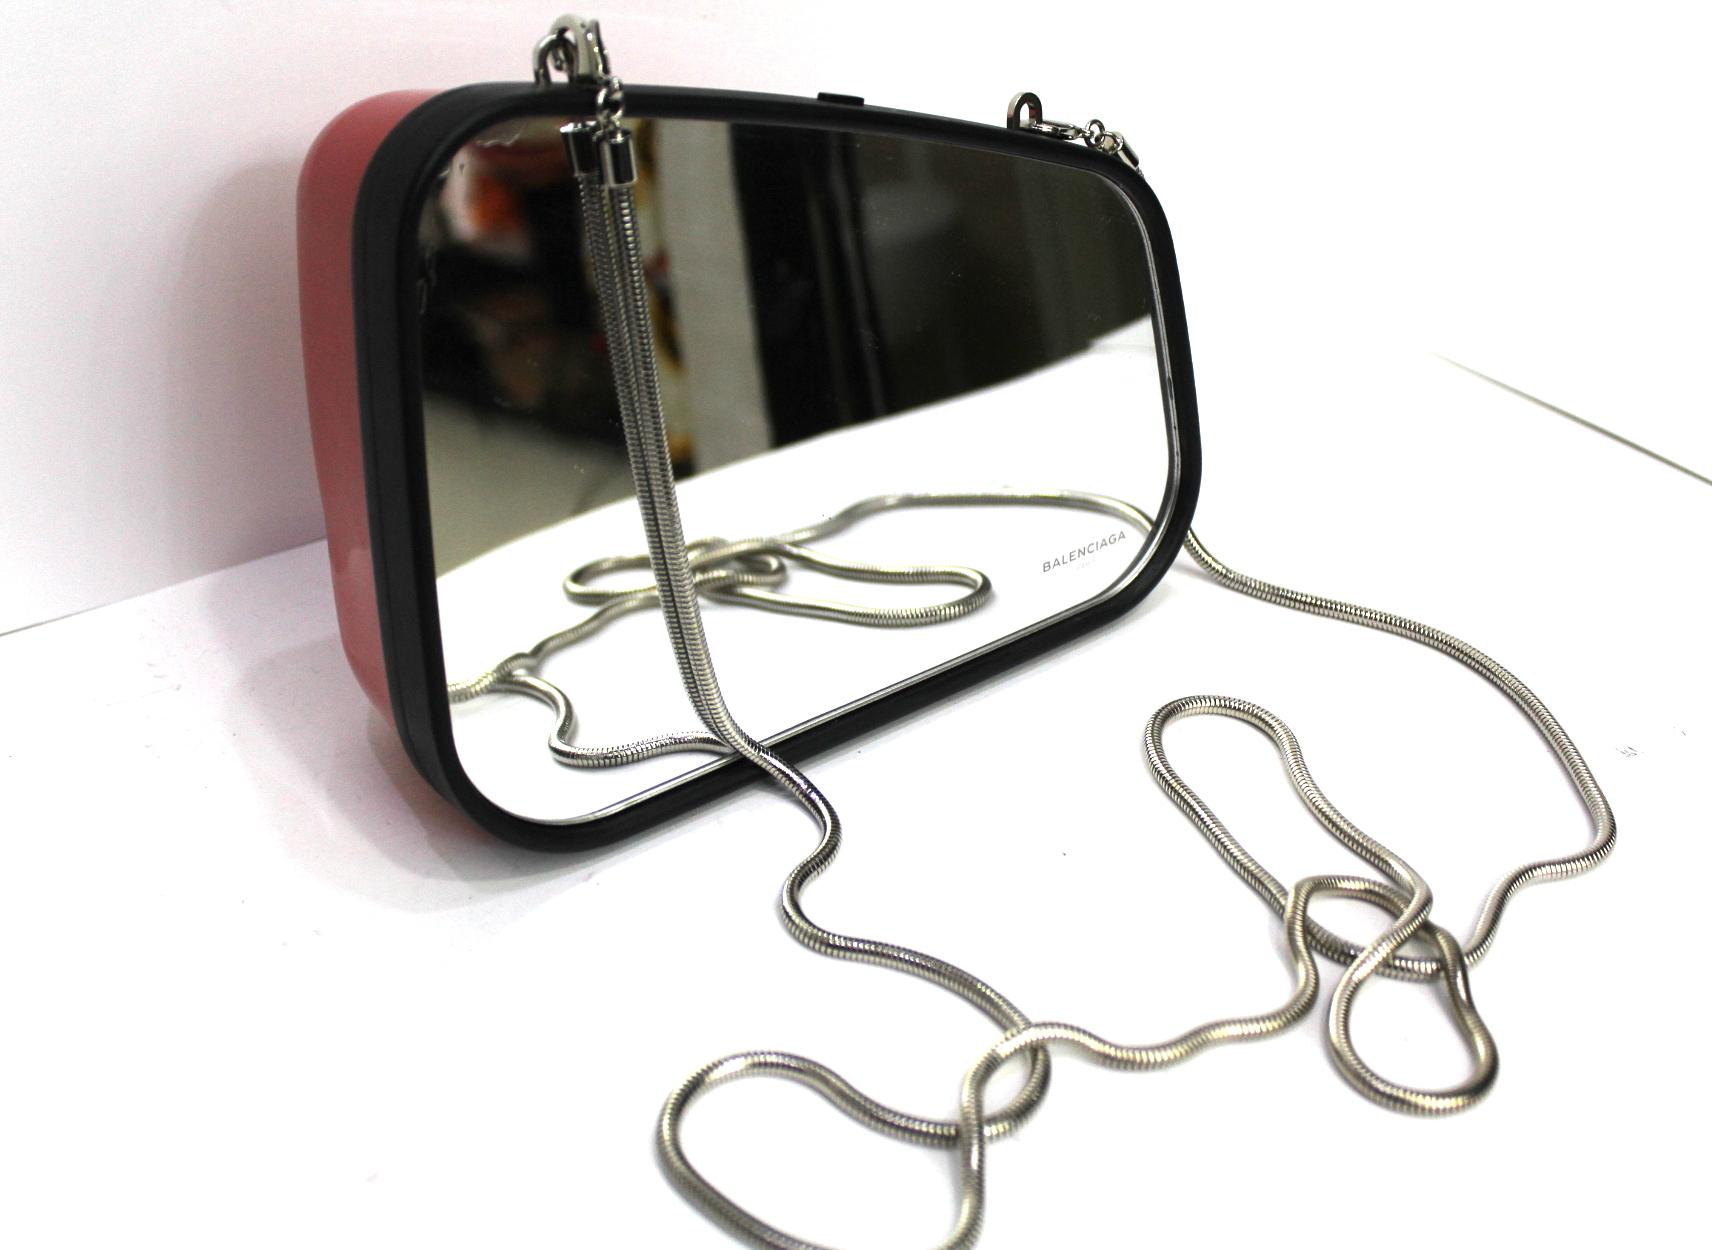 REAR-VIEW MIRROR clutch bag by Balenciaga. This bag has the shape of a car mirror. Opening with button. Equipped with a metal shoulder strap. It is in excellent condition, equipped with a box.